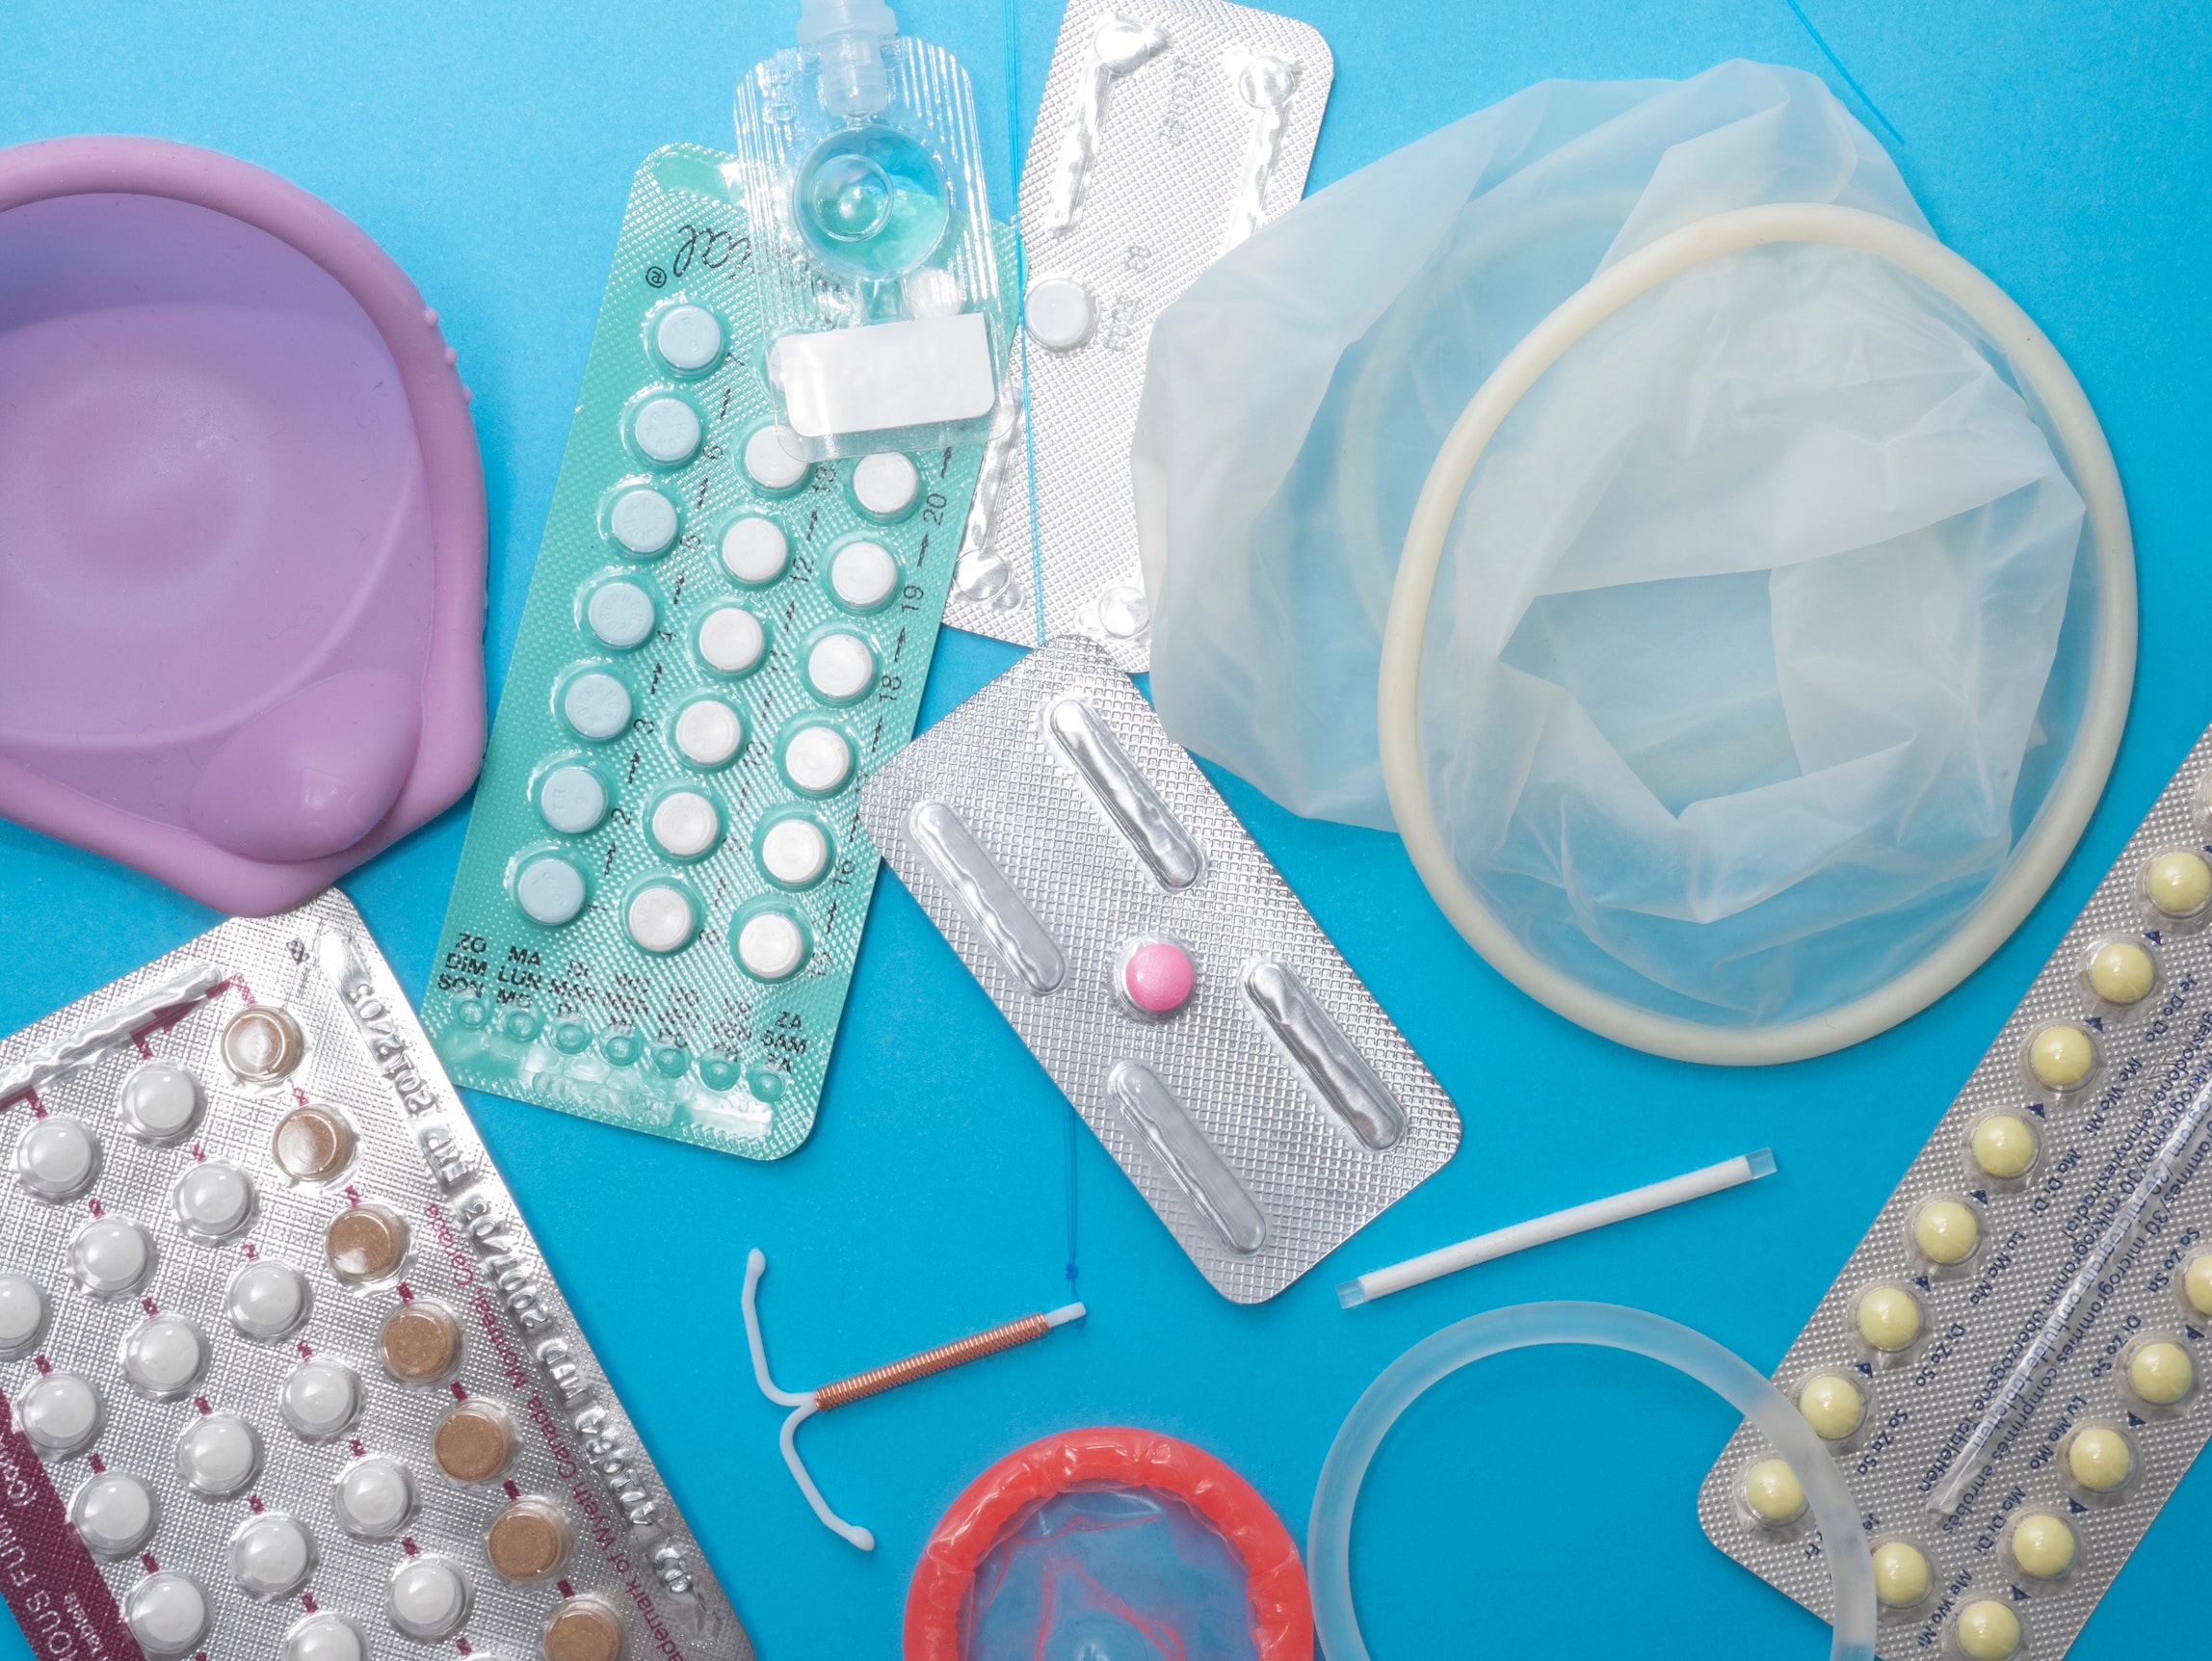 The contraceptive supply chain in India has been severely disrupted by the COVID-19 pandemic. Millions of commodities, deemed non-essential goods, were unable to reach clients in need of them. Mufananidzo: Reproductive Health Supplies Coalition (via Unsplash)